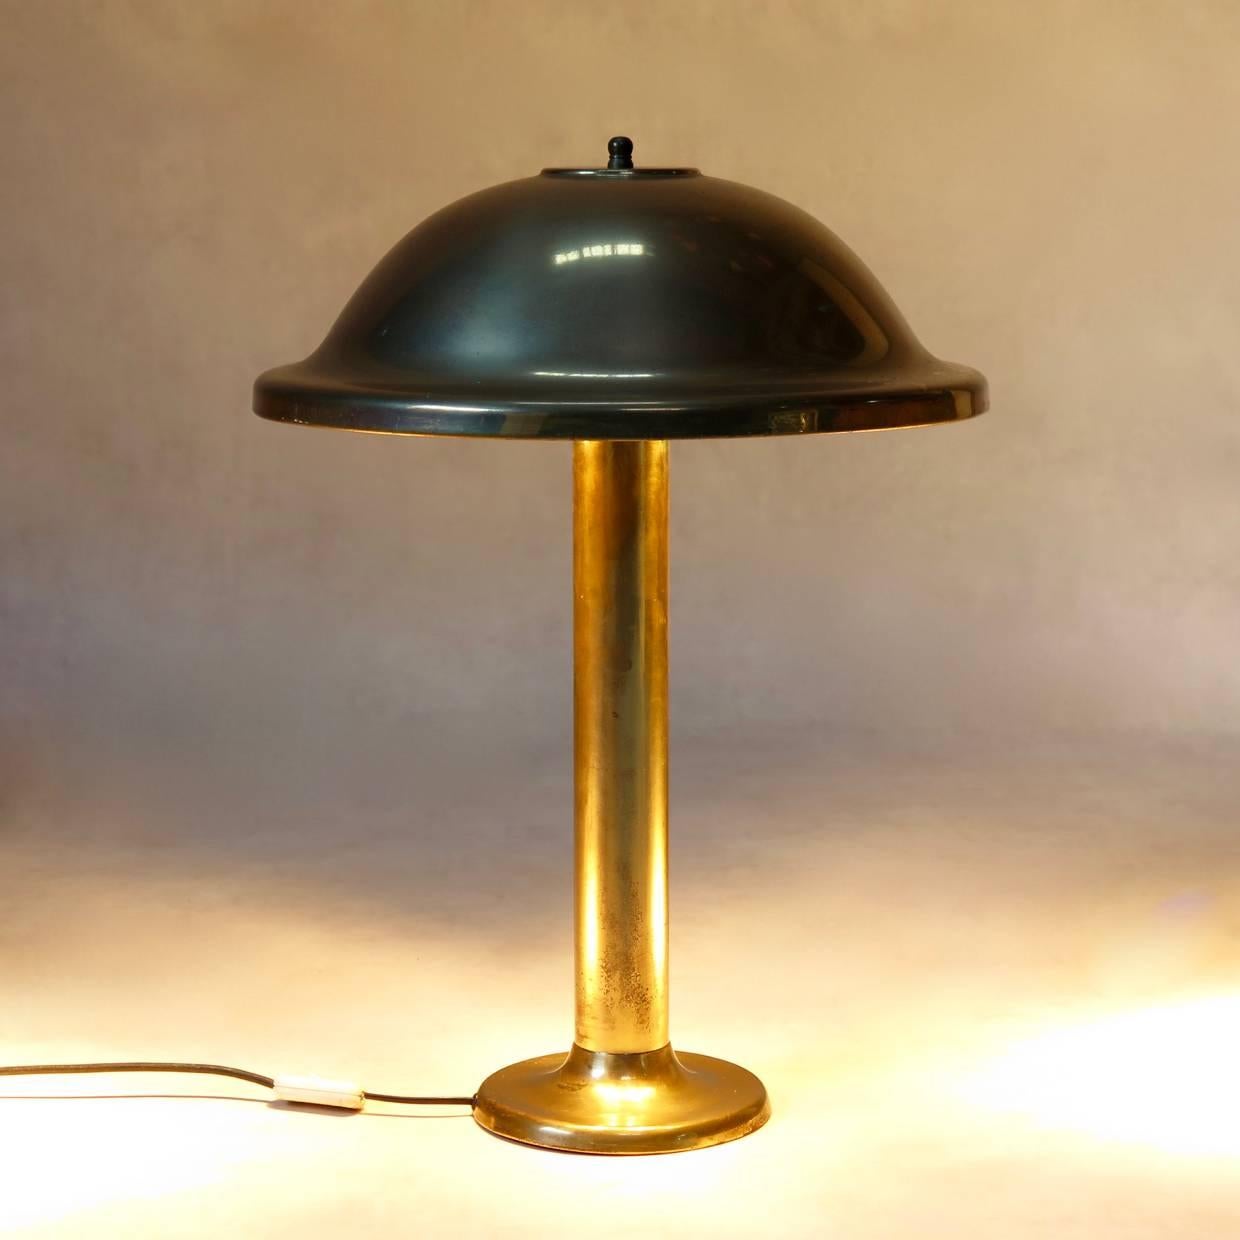 Beautiful, tall desk lamp of elegant, simple design, with a dome-shaped shade, raised on a stem base. The shade holds two bulbs. Rather heavy.